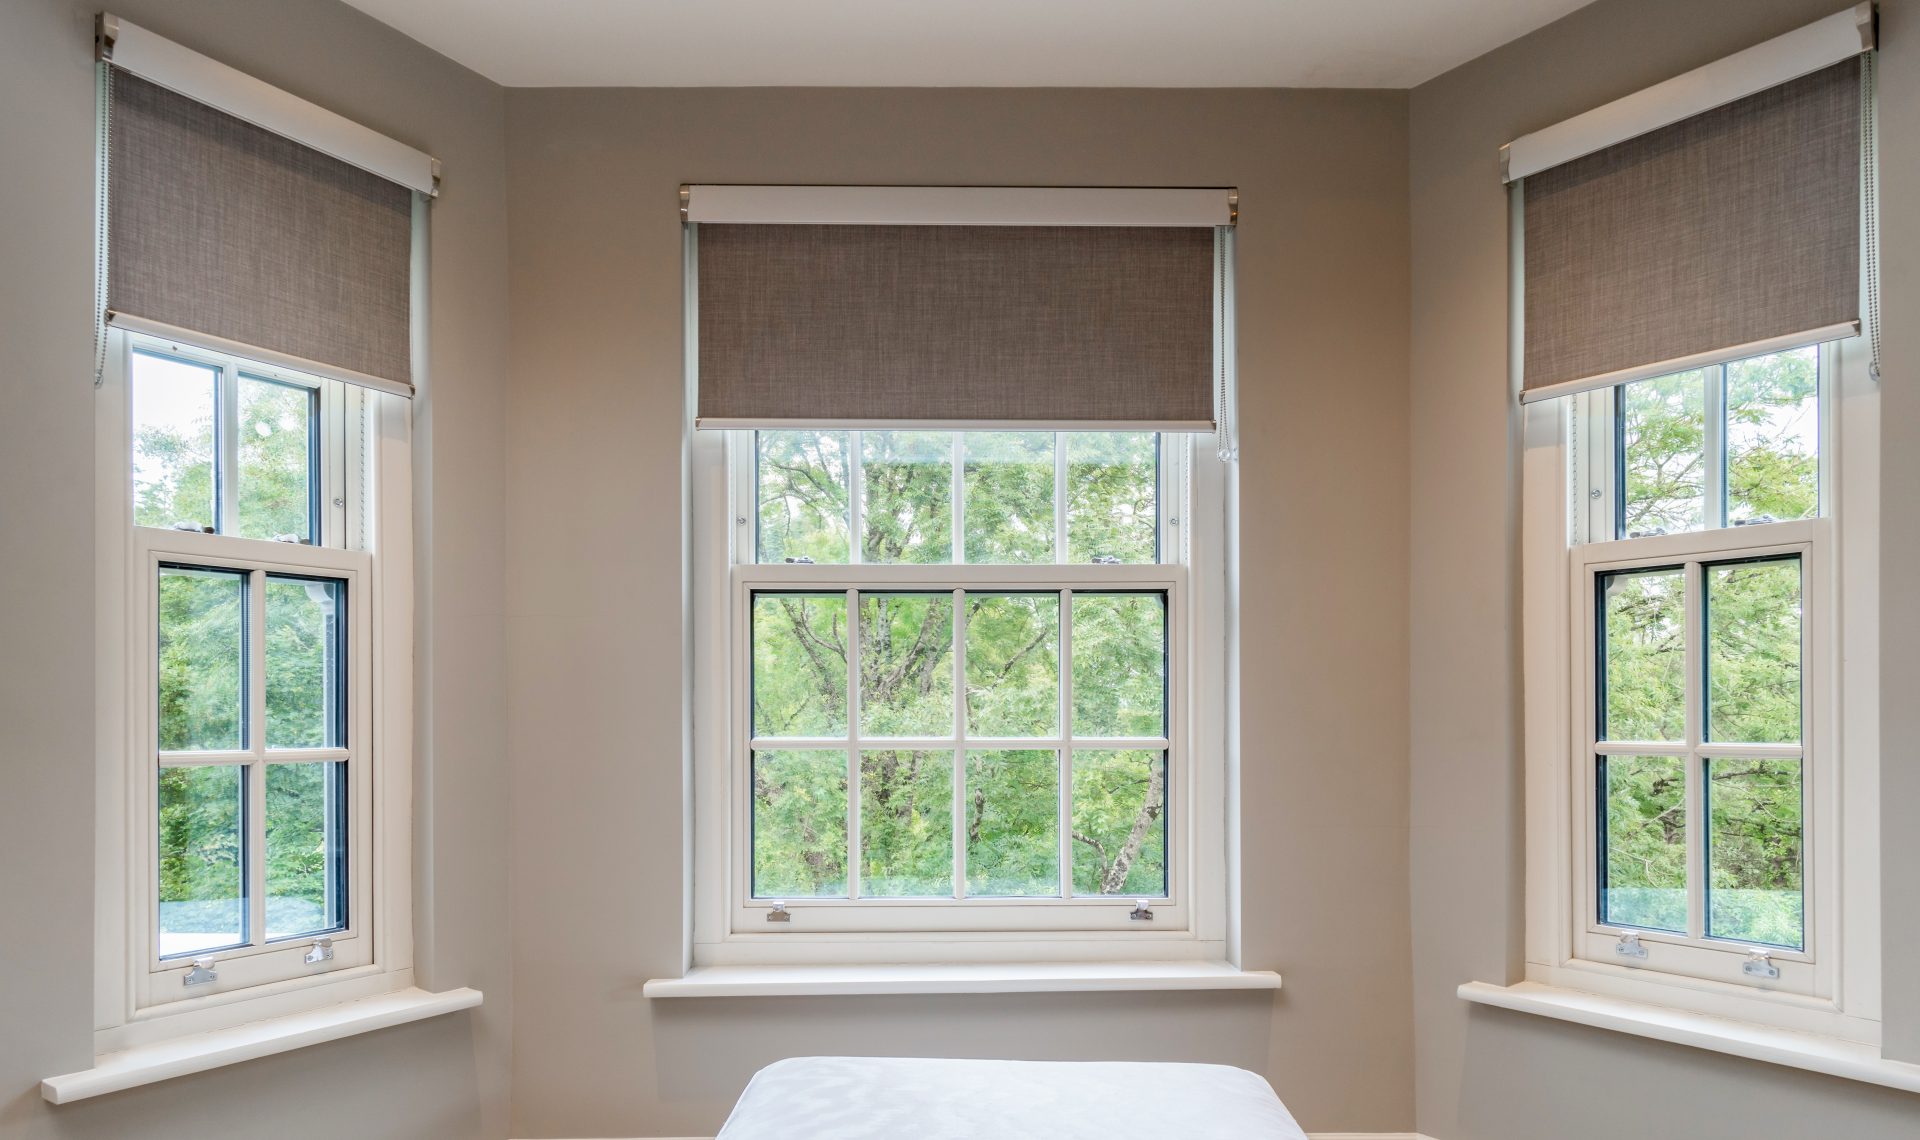 Shutters, Blinds or Shades: Which is right for your windows?